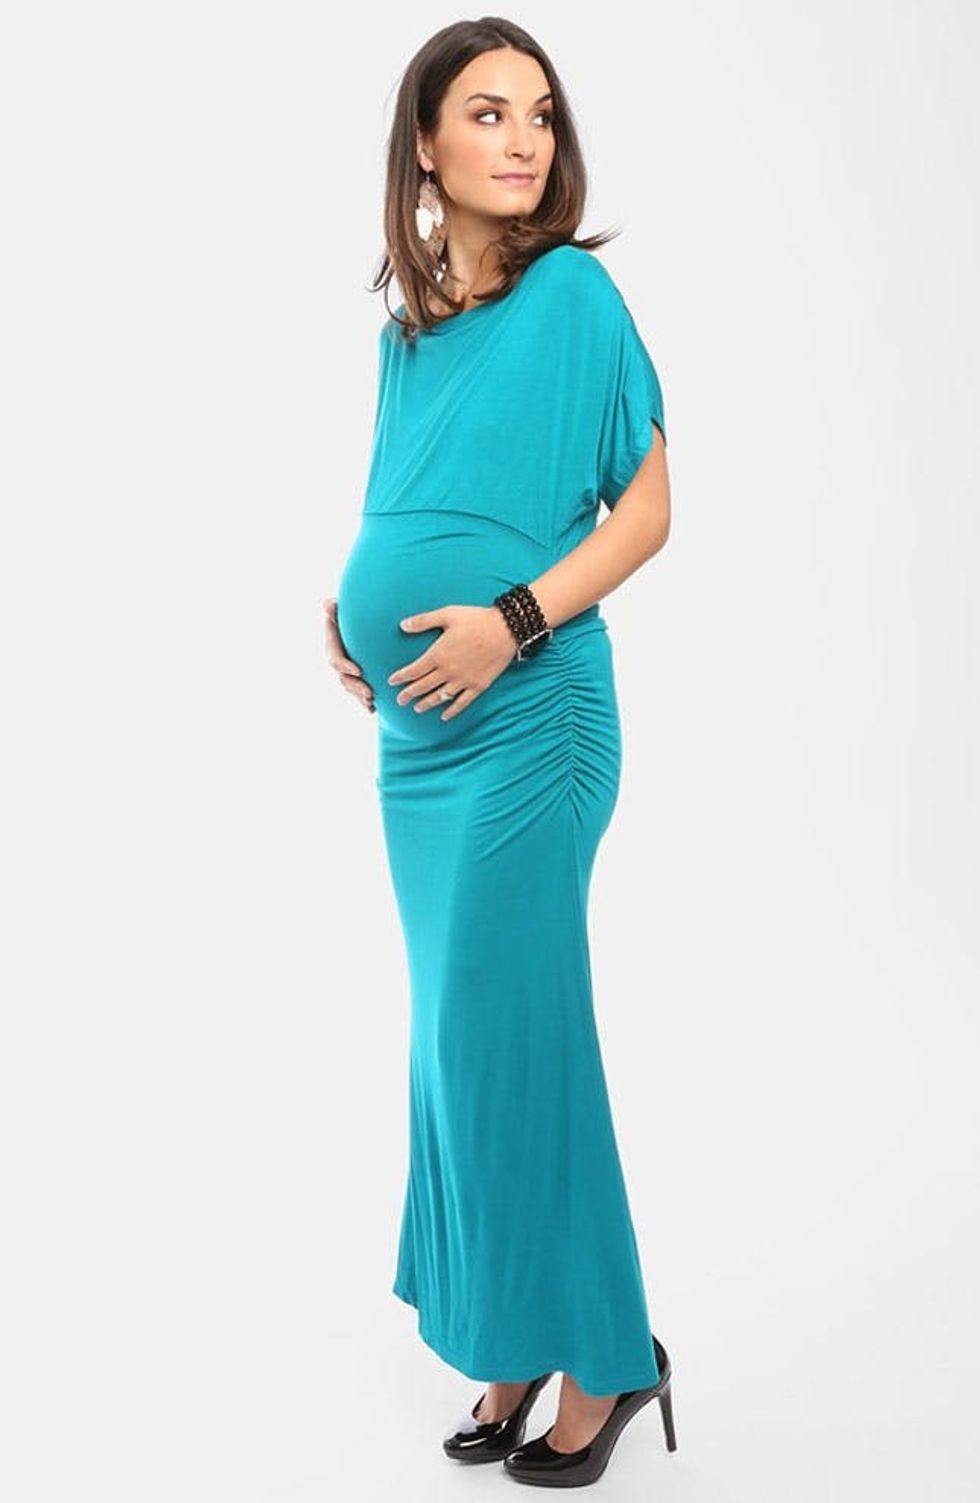 20 Party-Ready Maternity Dresses for Modern Moms-to-Be - Brit + Co